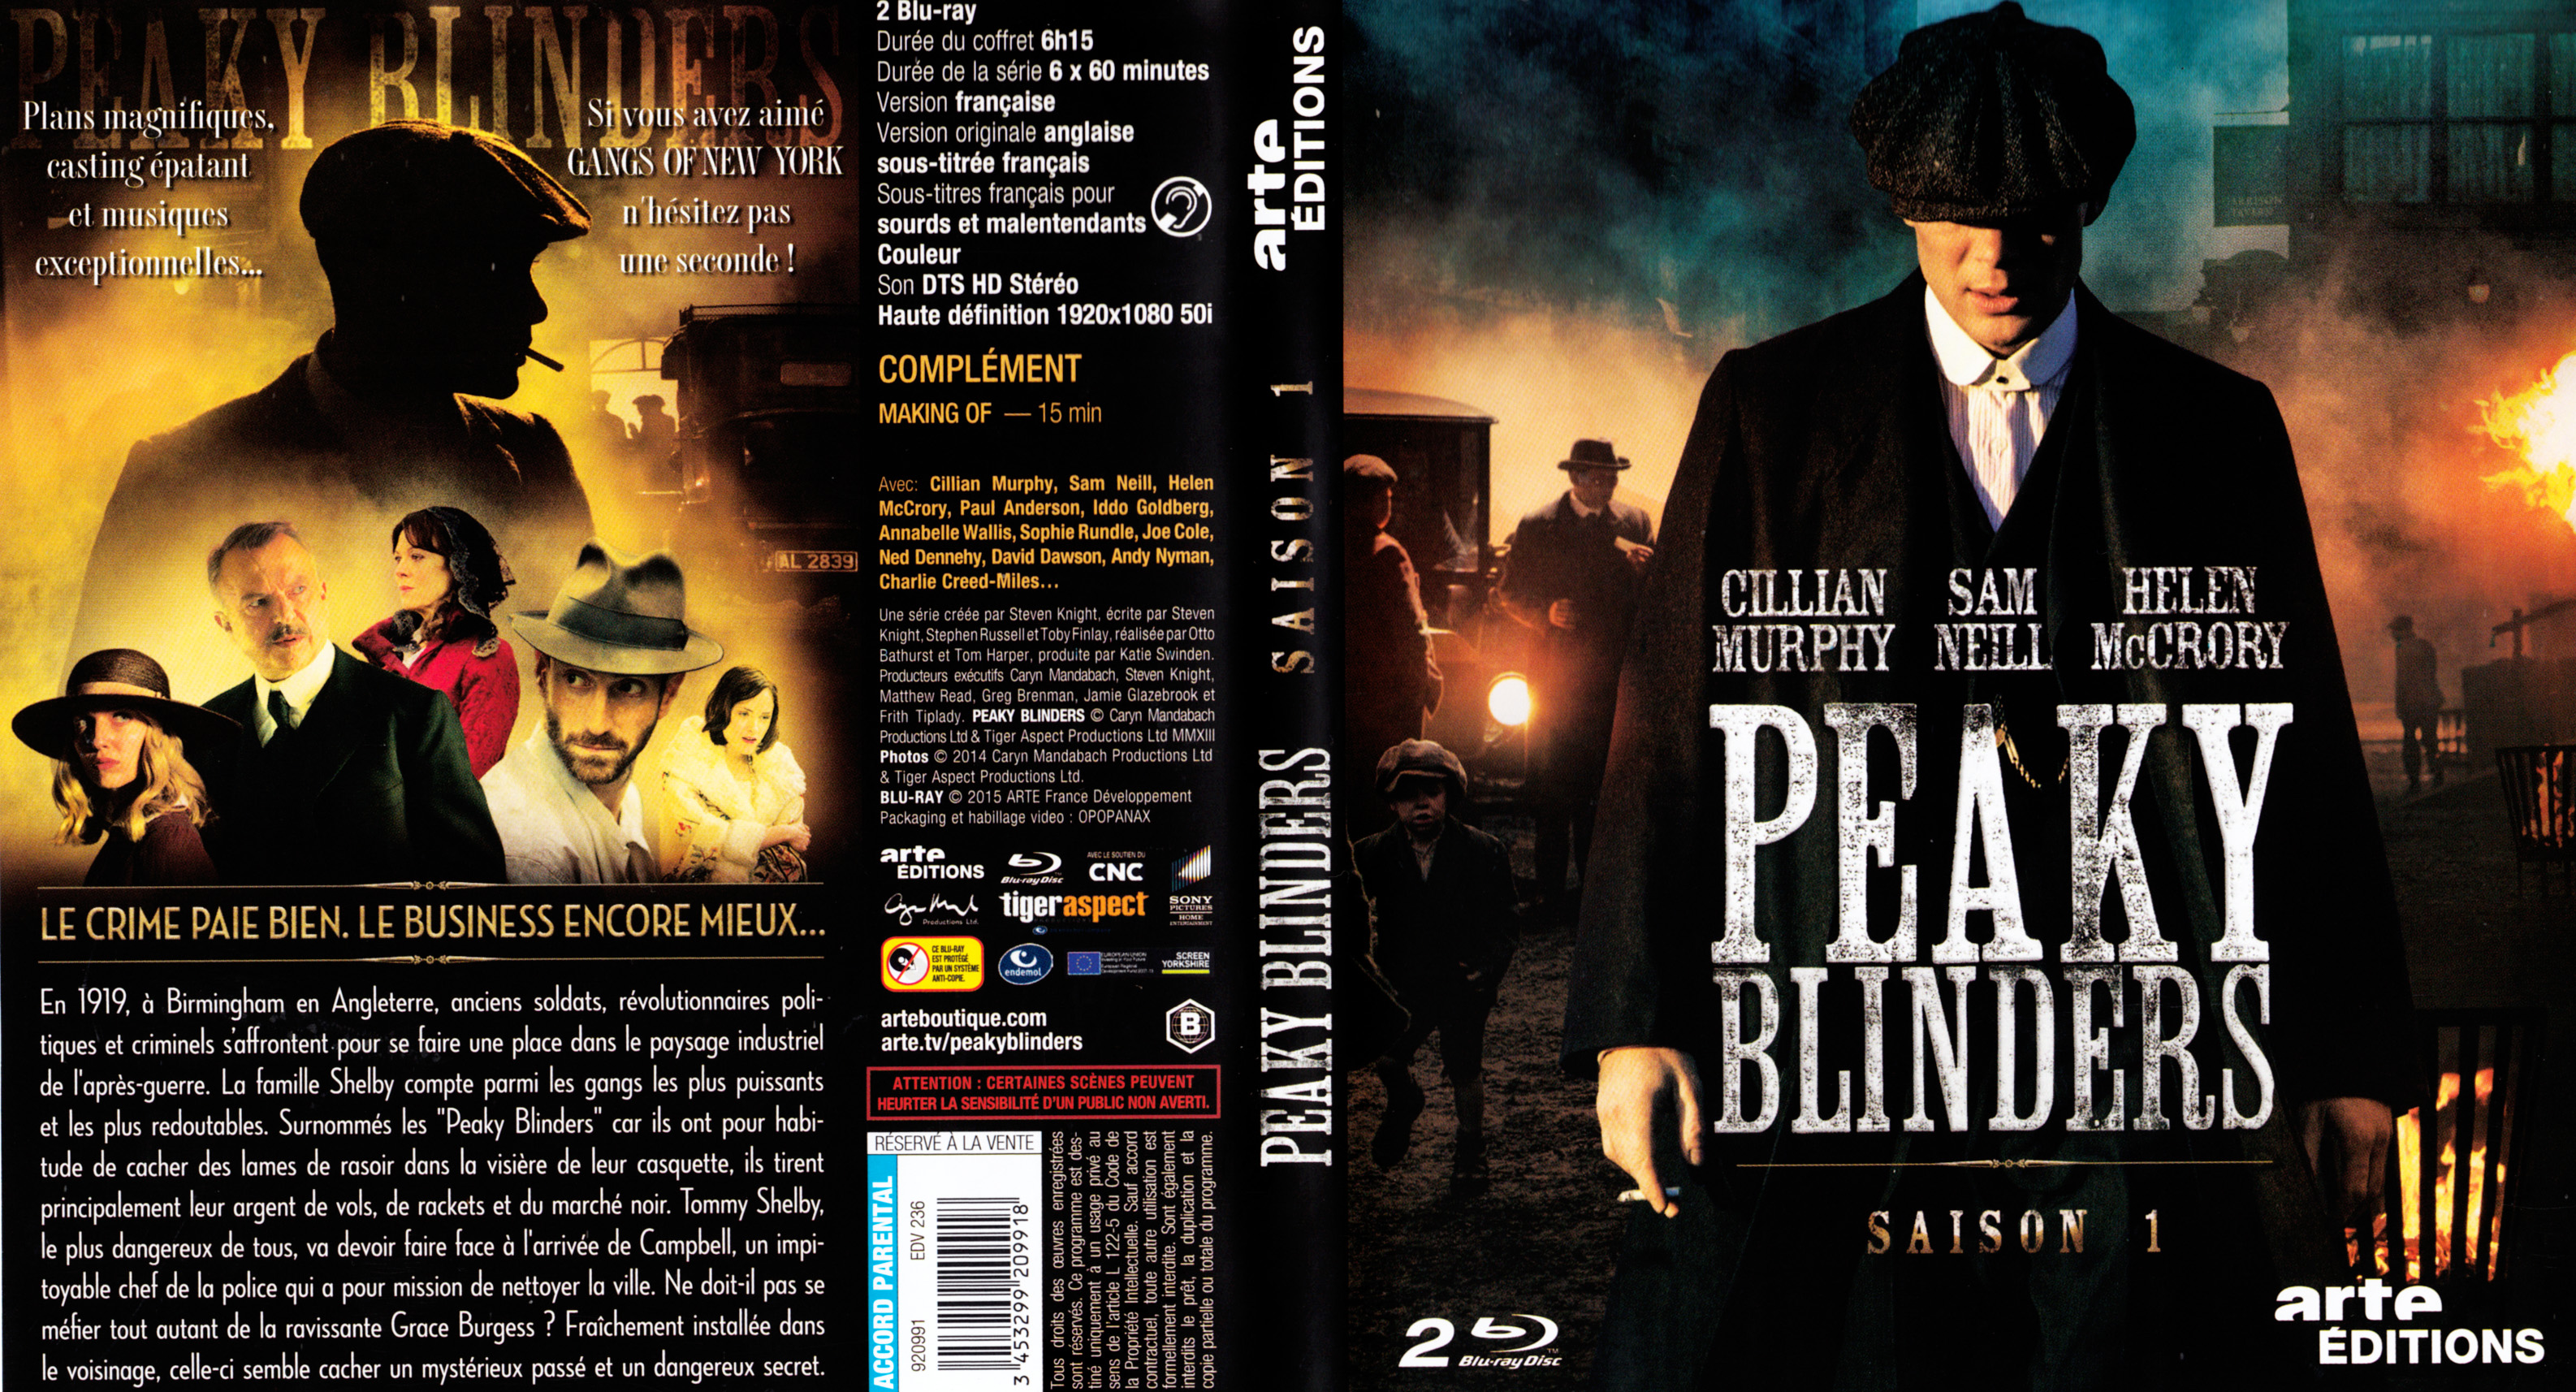 Jaquette DVD Peaky Blinders Saison 1 (BLU-RAY)